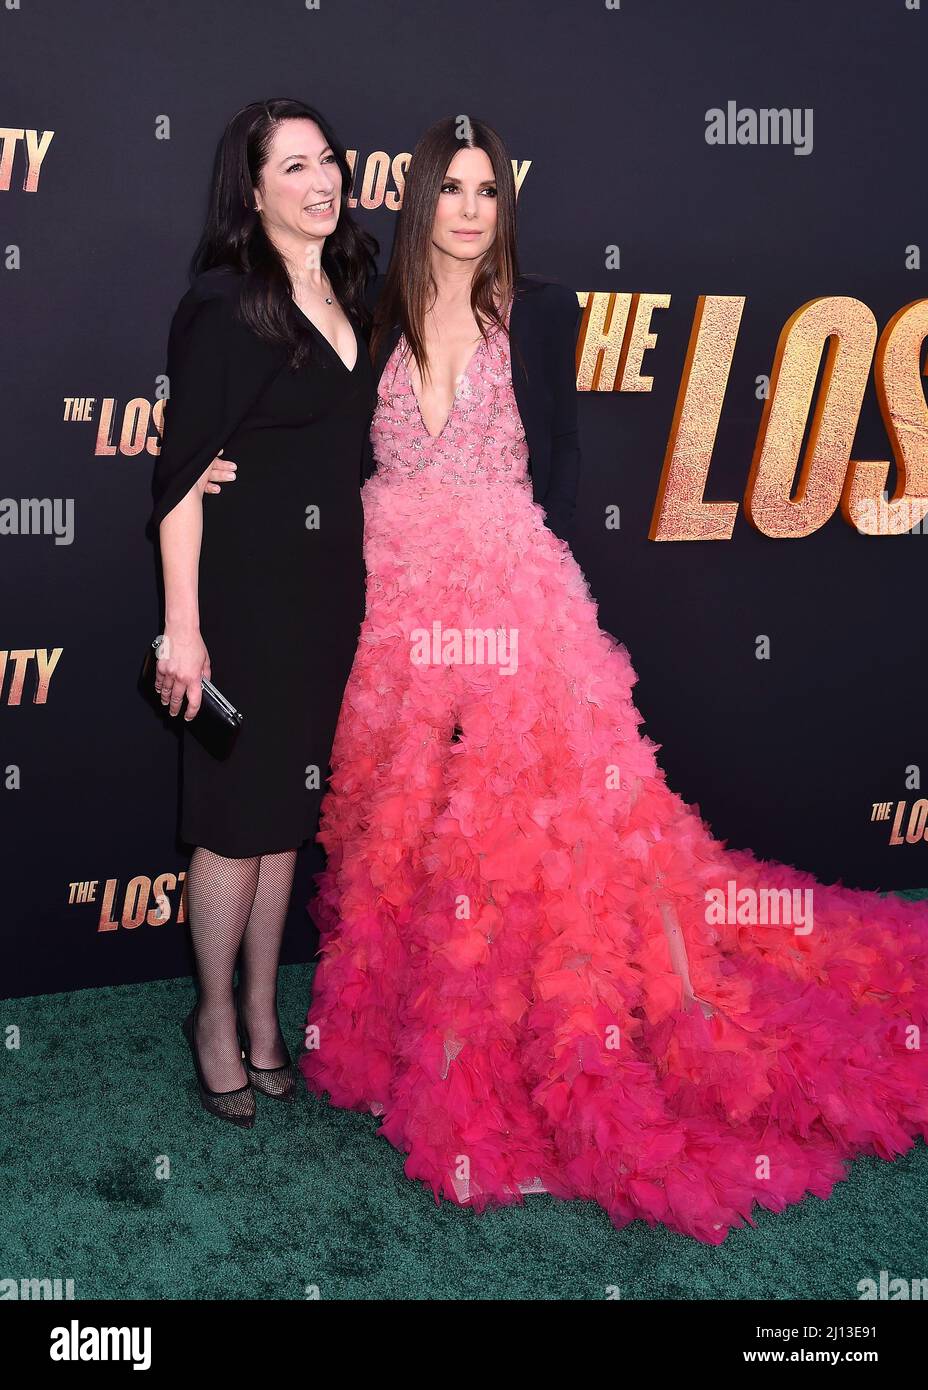 Los Angeles Ca March 21 Gesine Bullock Prado L And Sandra Bullock Attend The Los Angeles Premiere Of Paramount Pictures The Lost City At Rege 2J13E91 